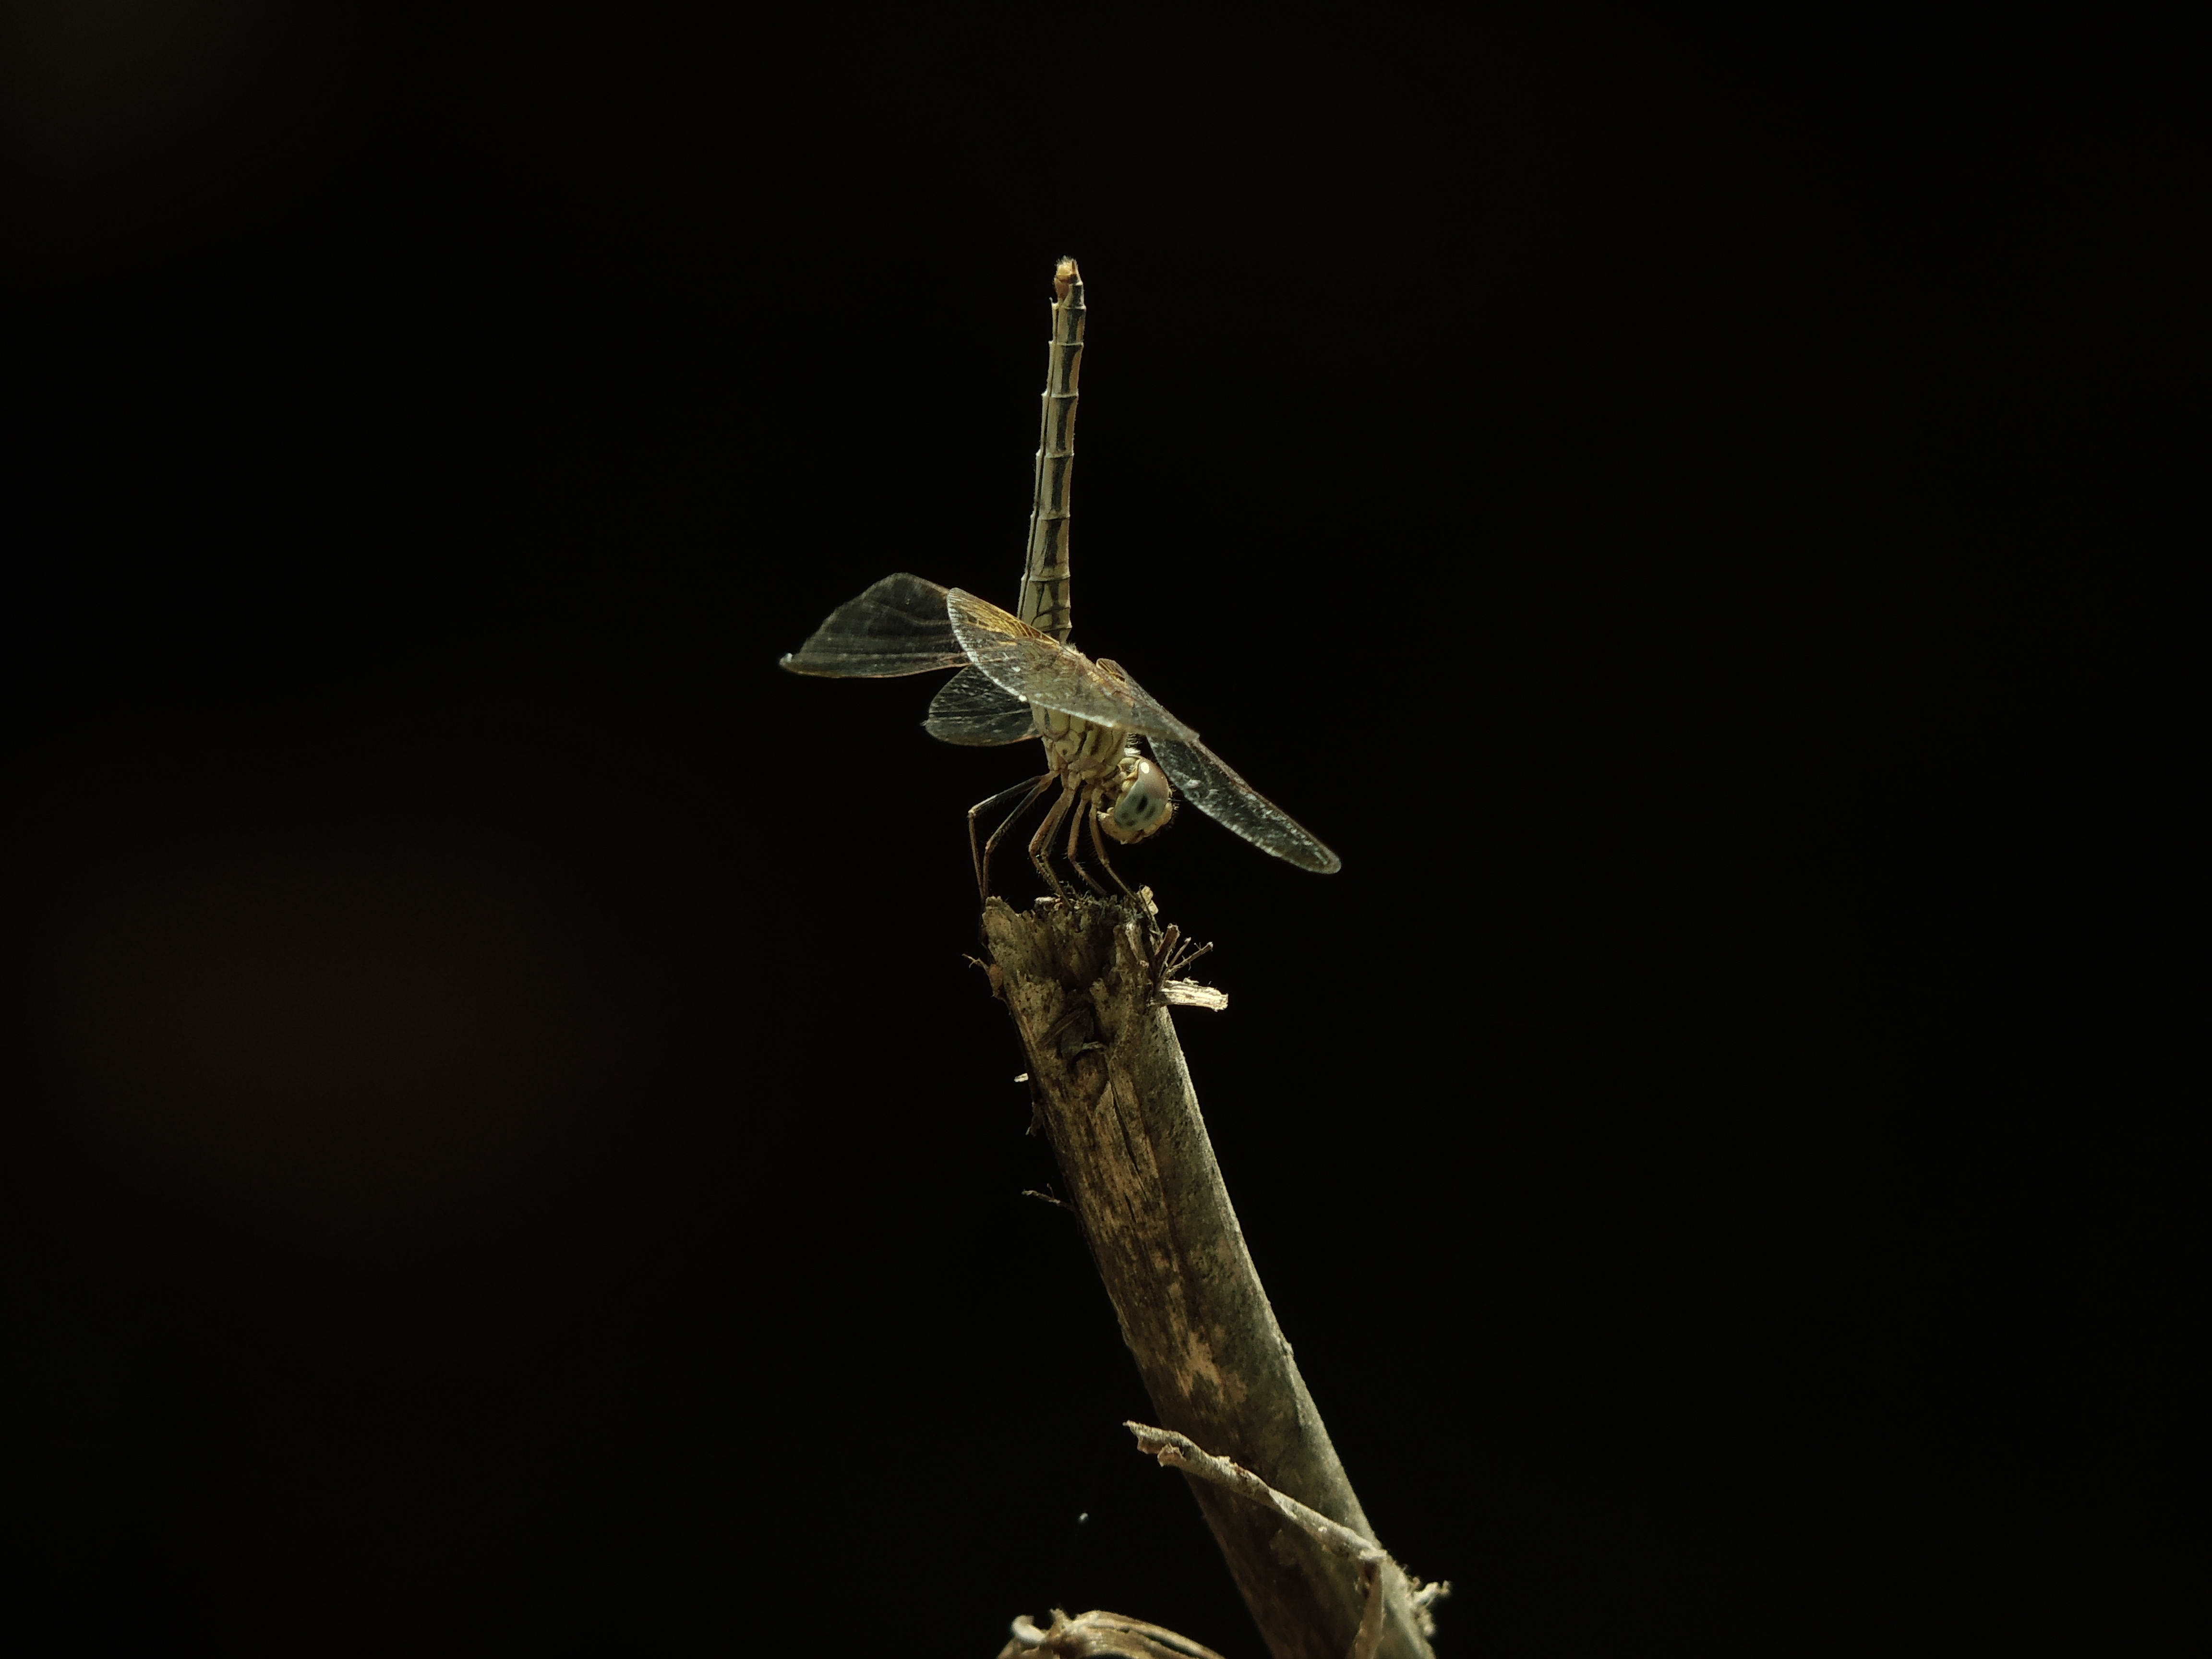 Dragonfly on the stem